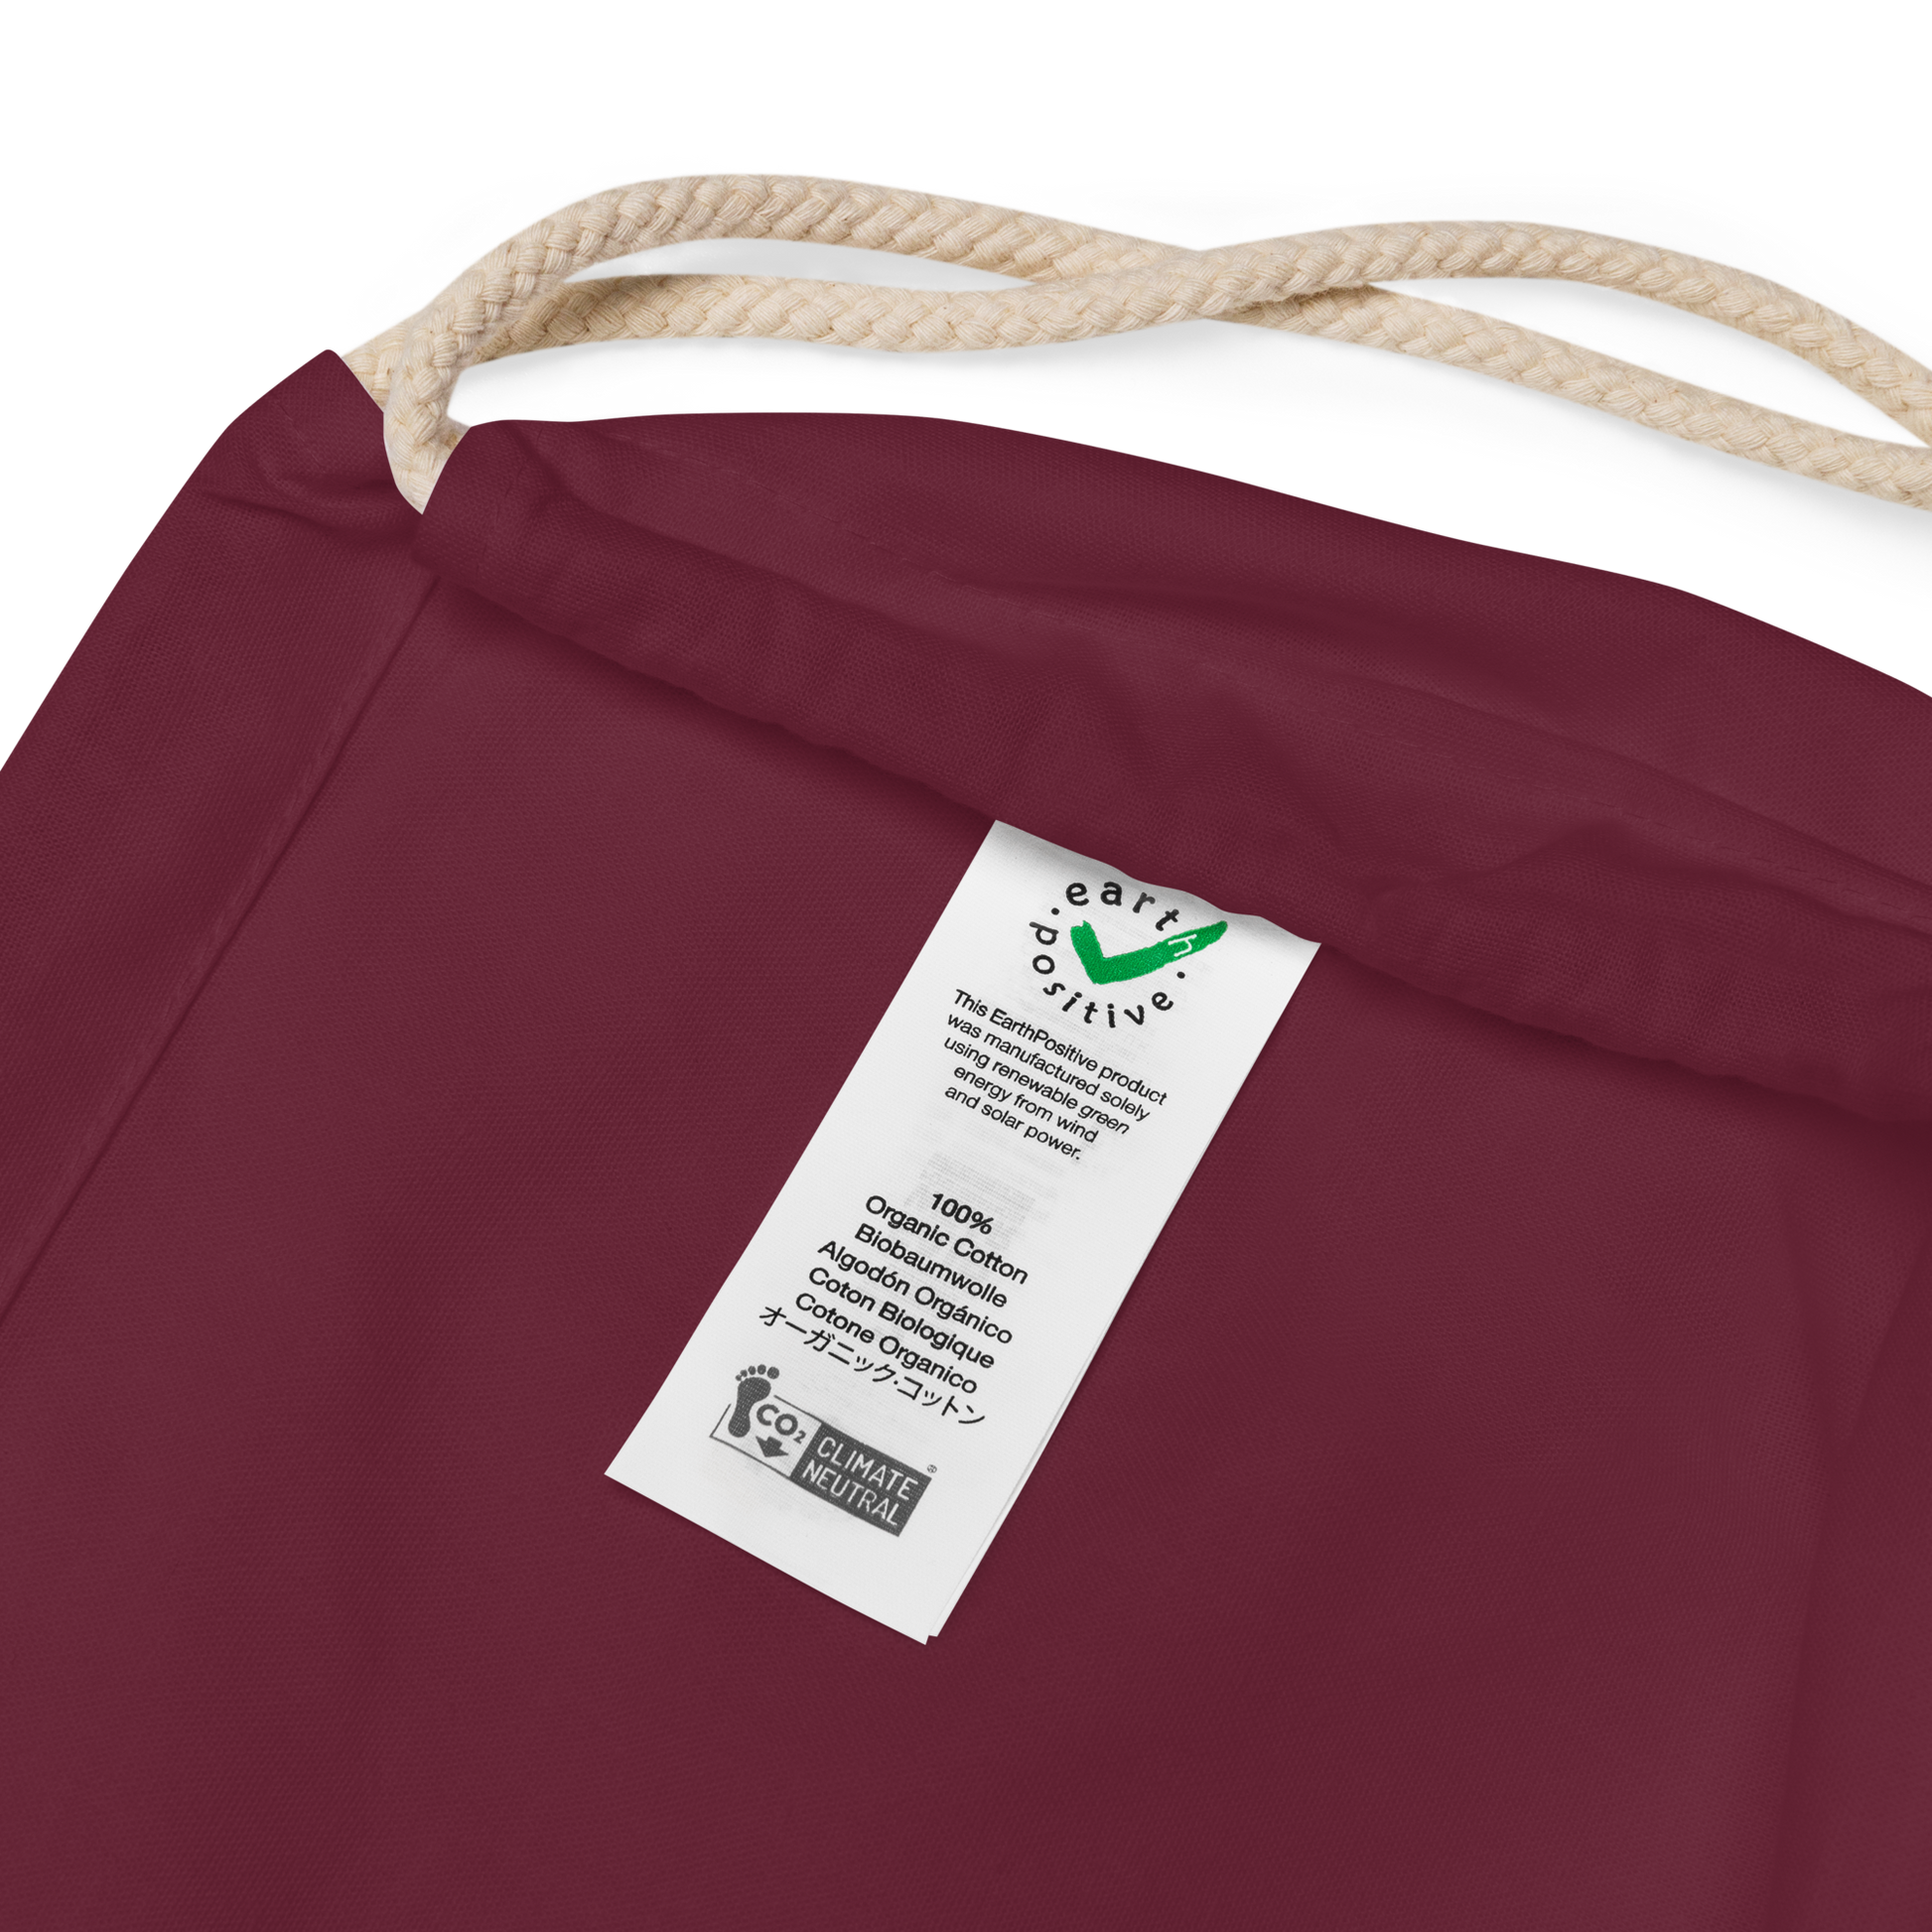 Inside label of Neurodiversity Rainbow Infinity EarthPositive Cotton Drawstring Bag in Burgundy